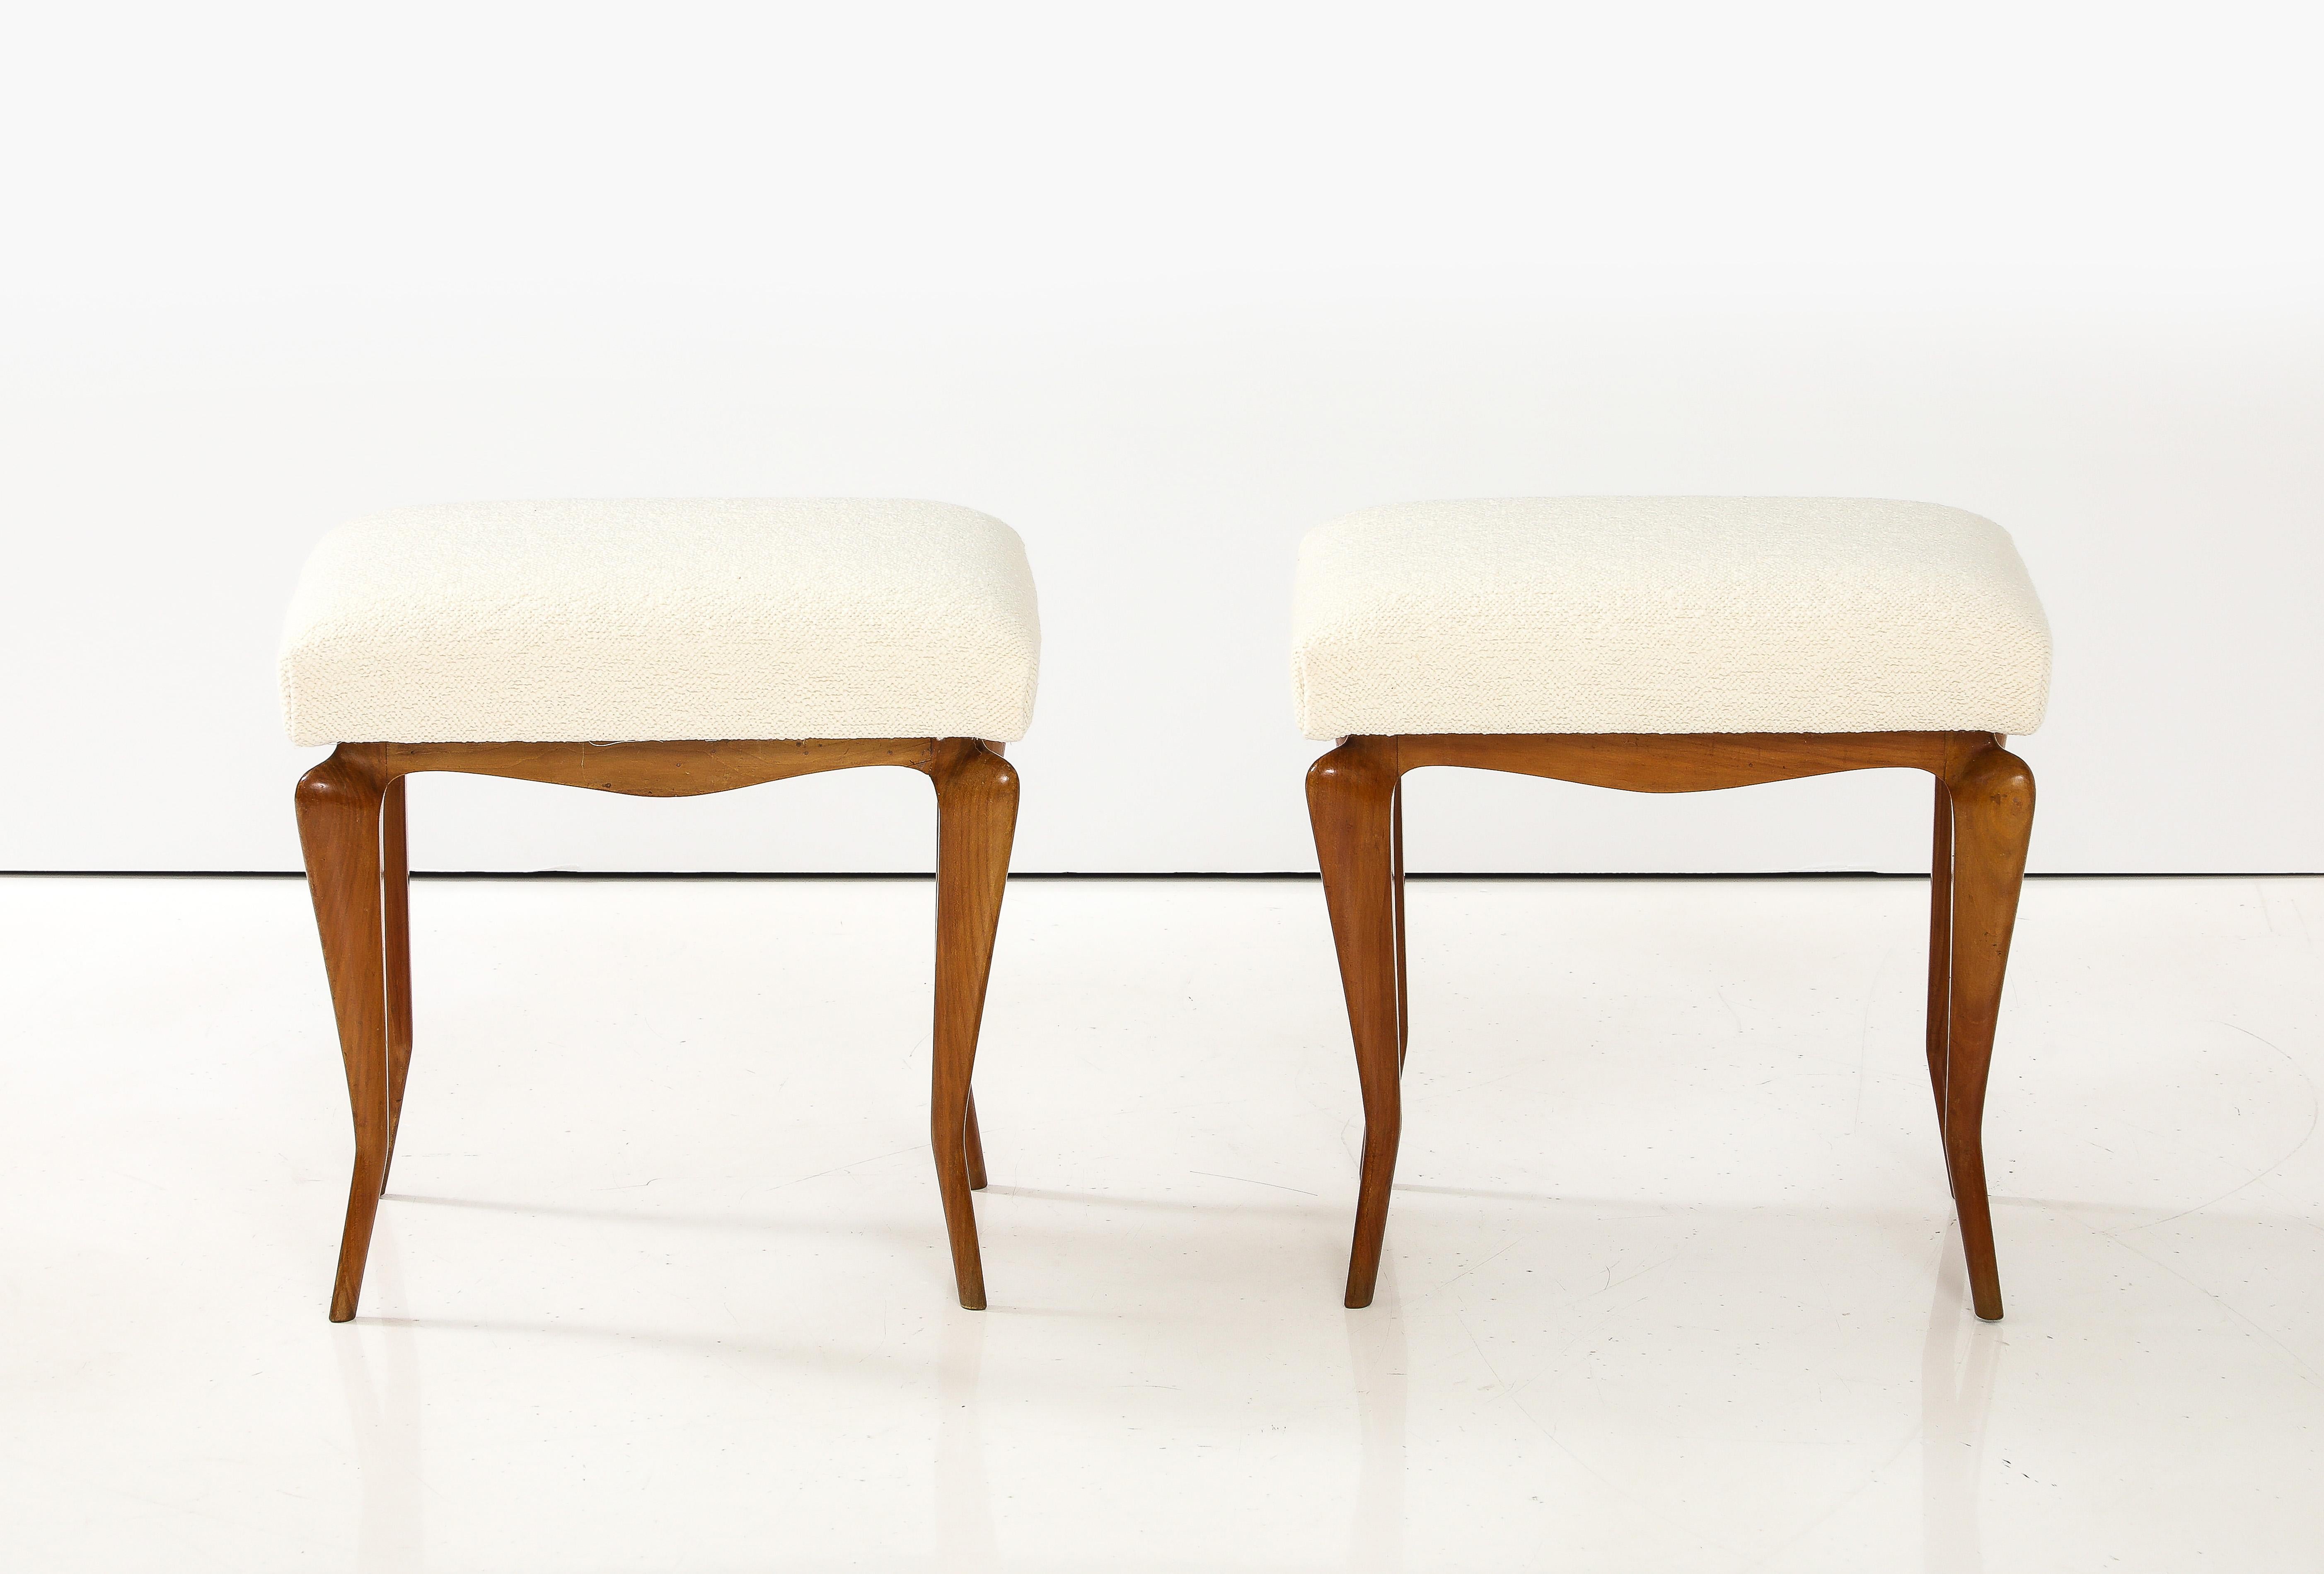 A pair of fine and elegant Italian walnut stools with cabriole legs and shaped apron.  The seats newly upholstered in a European textured cream colored cotton. 
Italy, circa 1930 
Size: 19 1/2